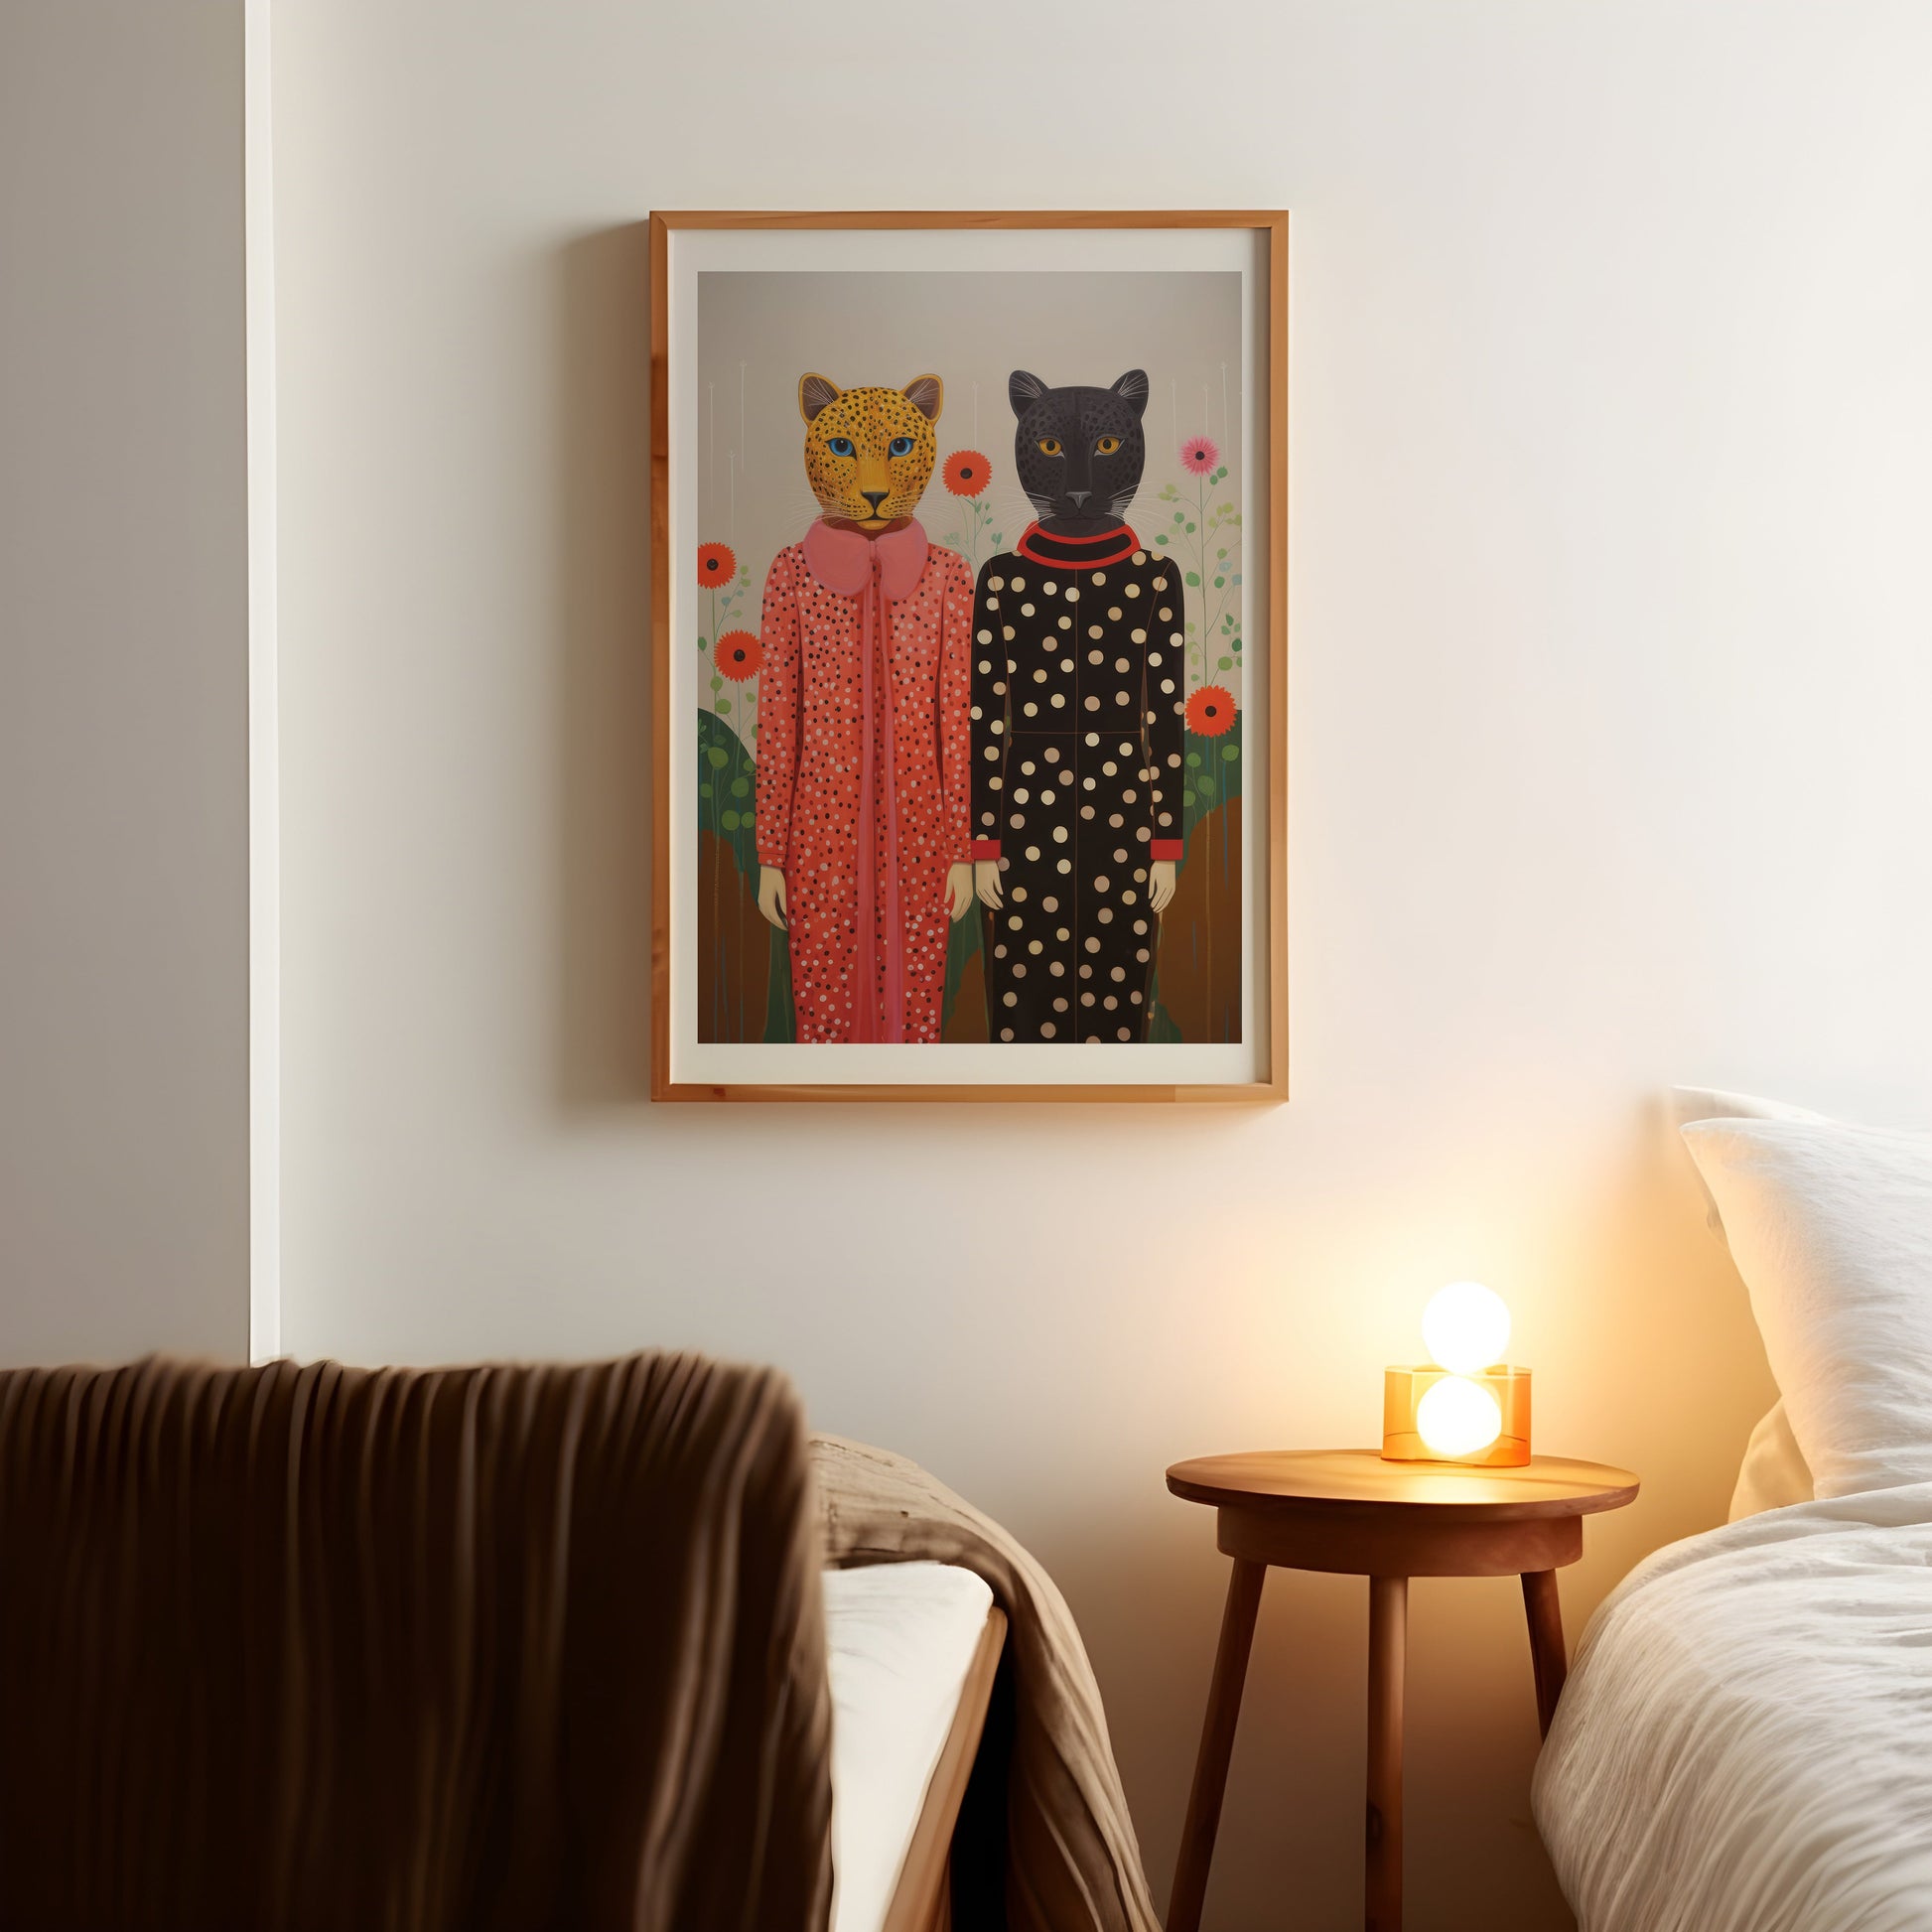 a picture of two cats on a wall above a bed